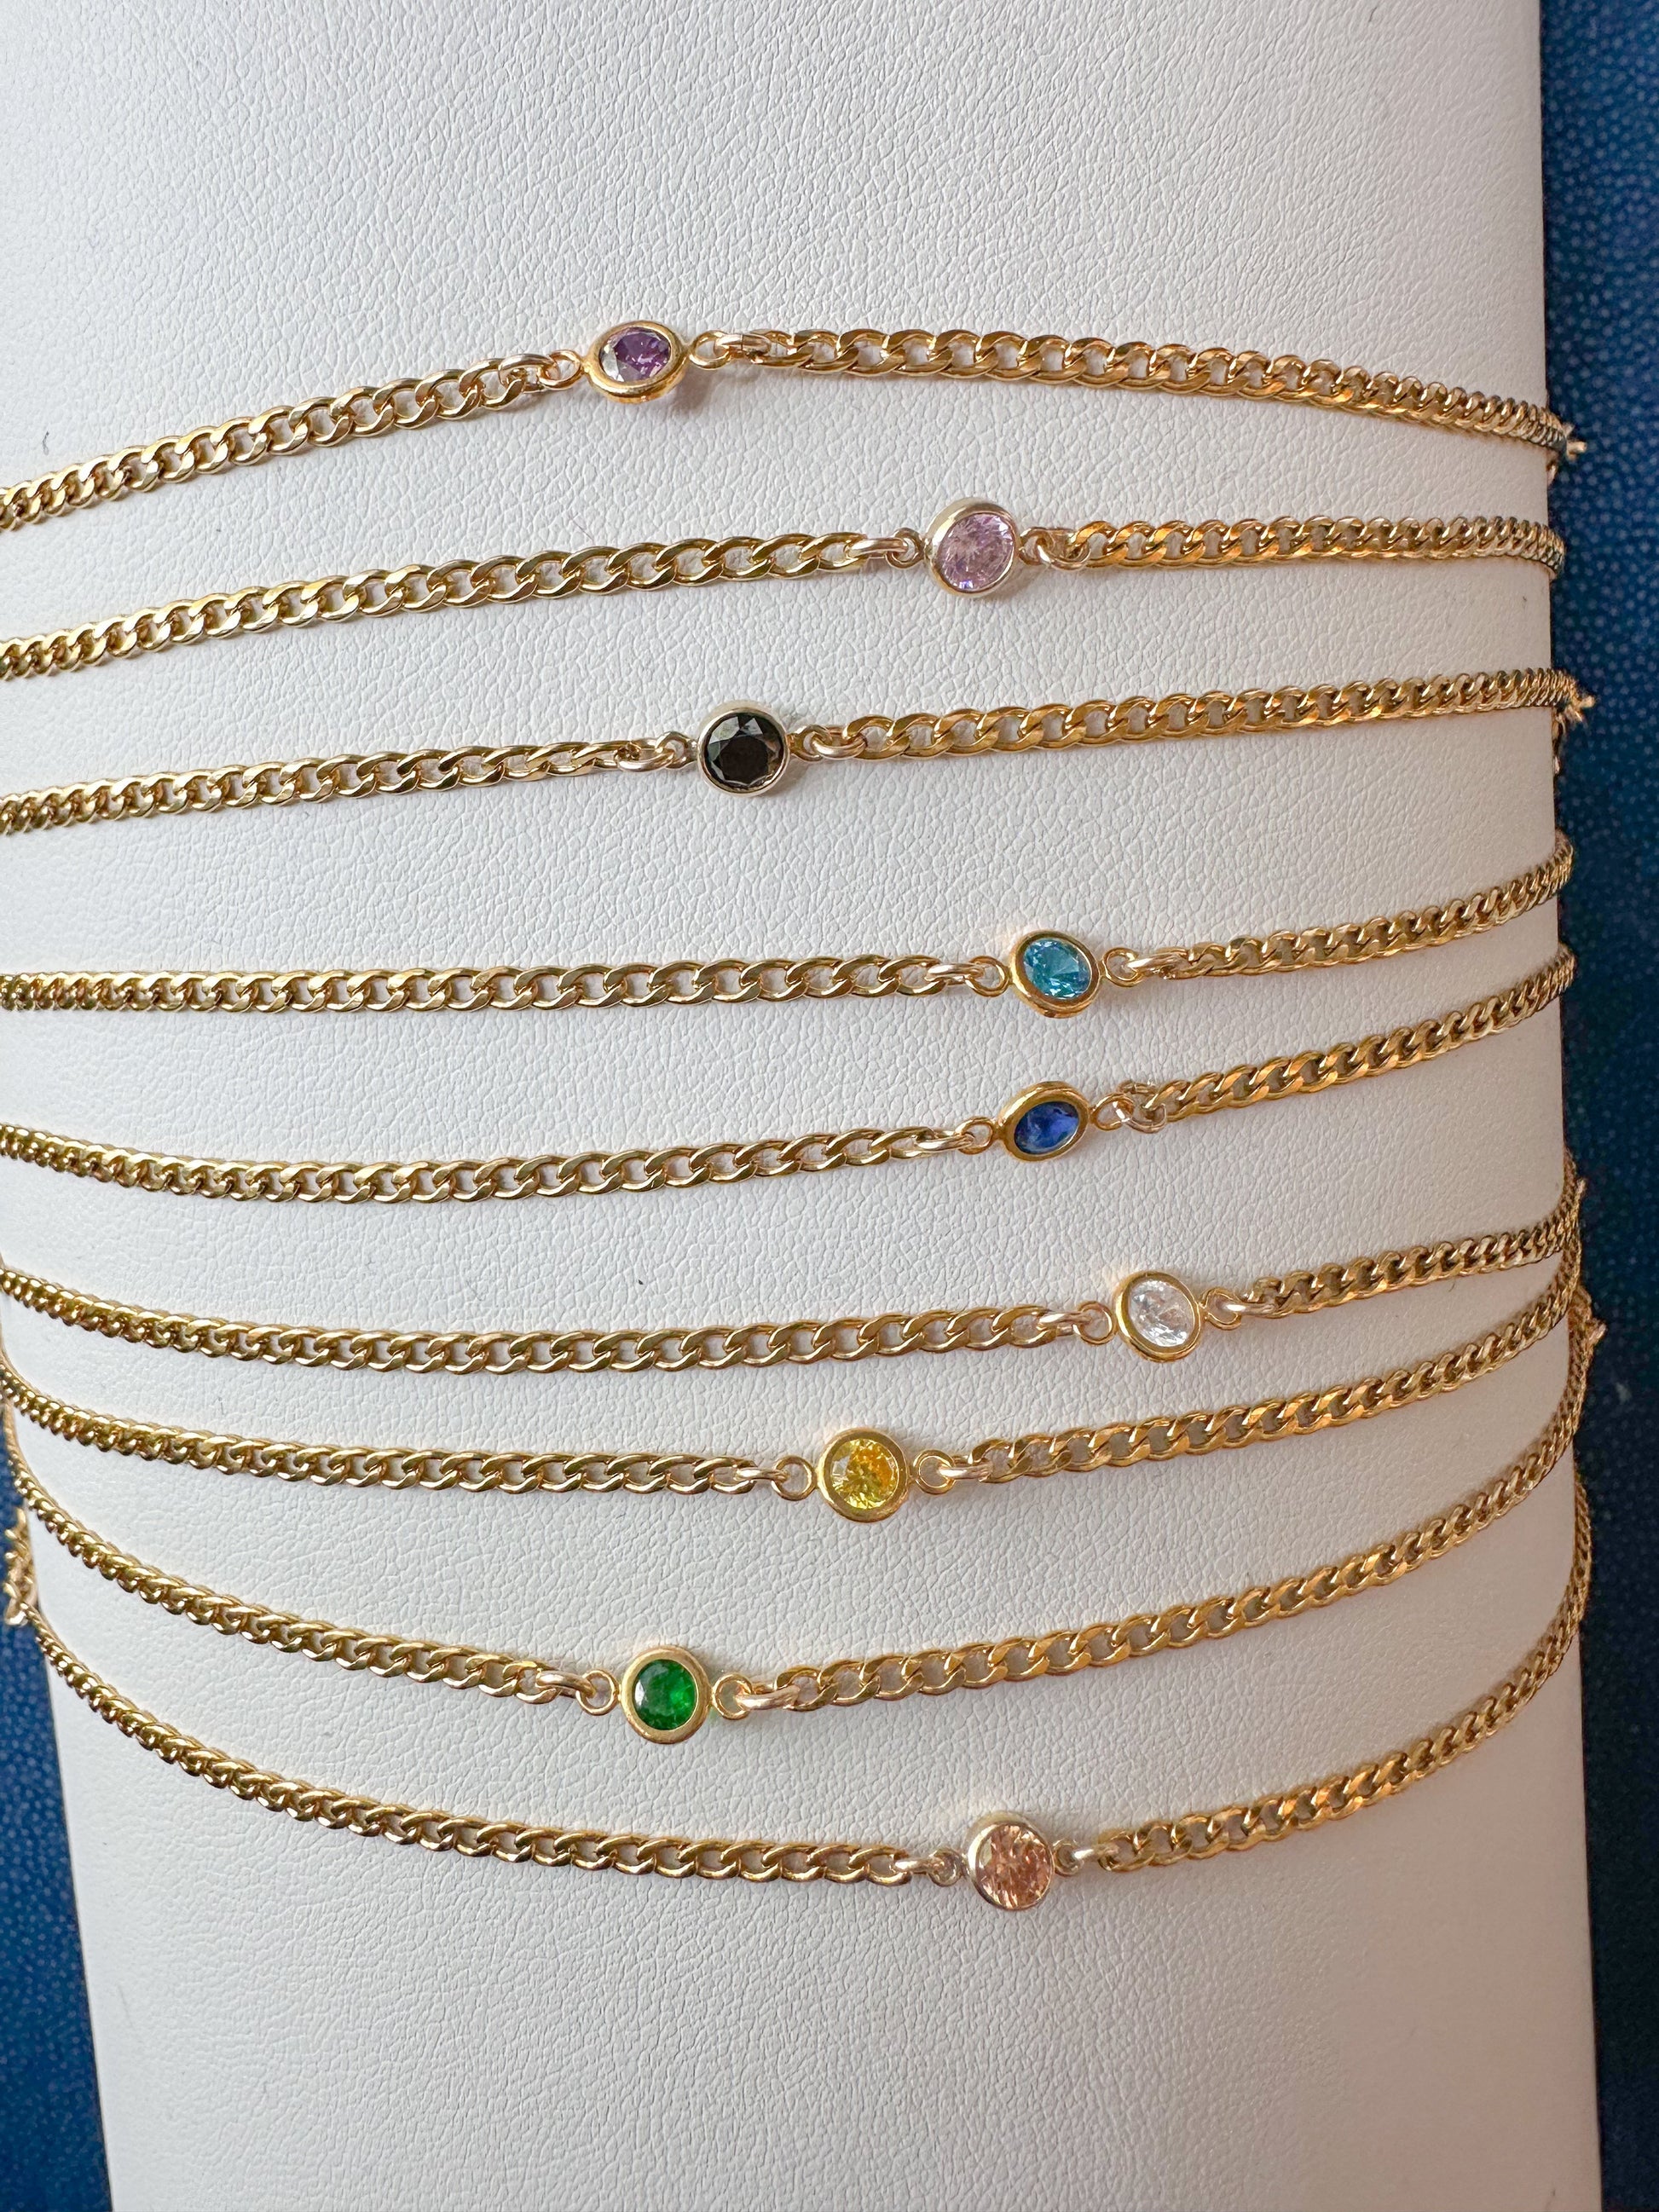 DRIP JEWELRY Necklace Birthstone Connected Bracelet or Necklace